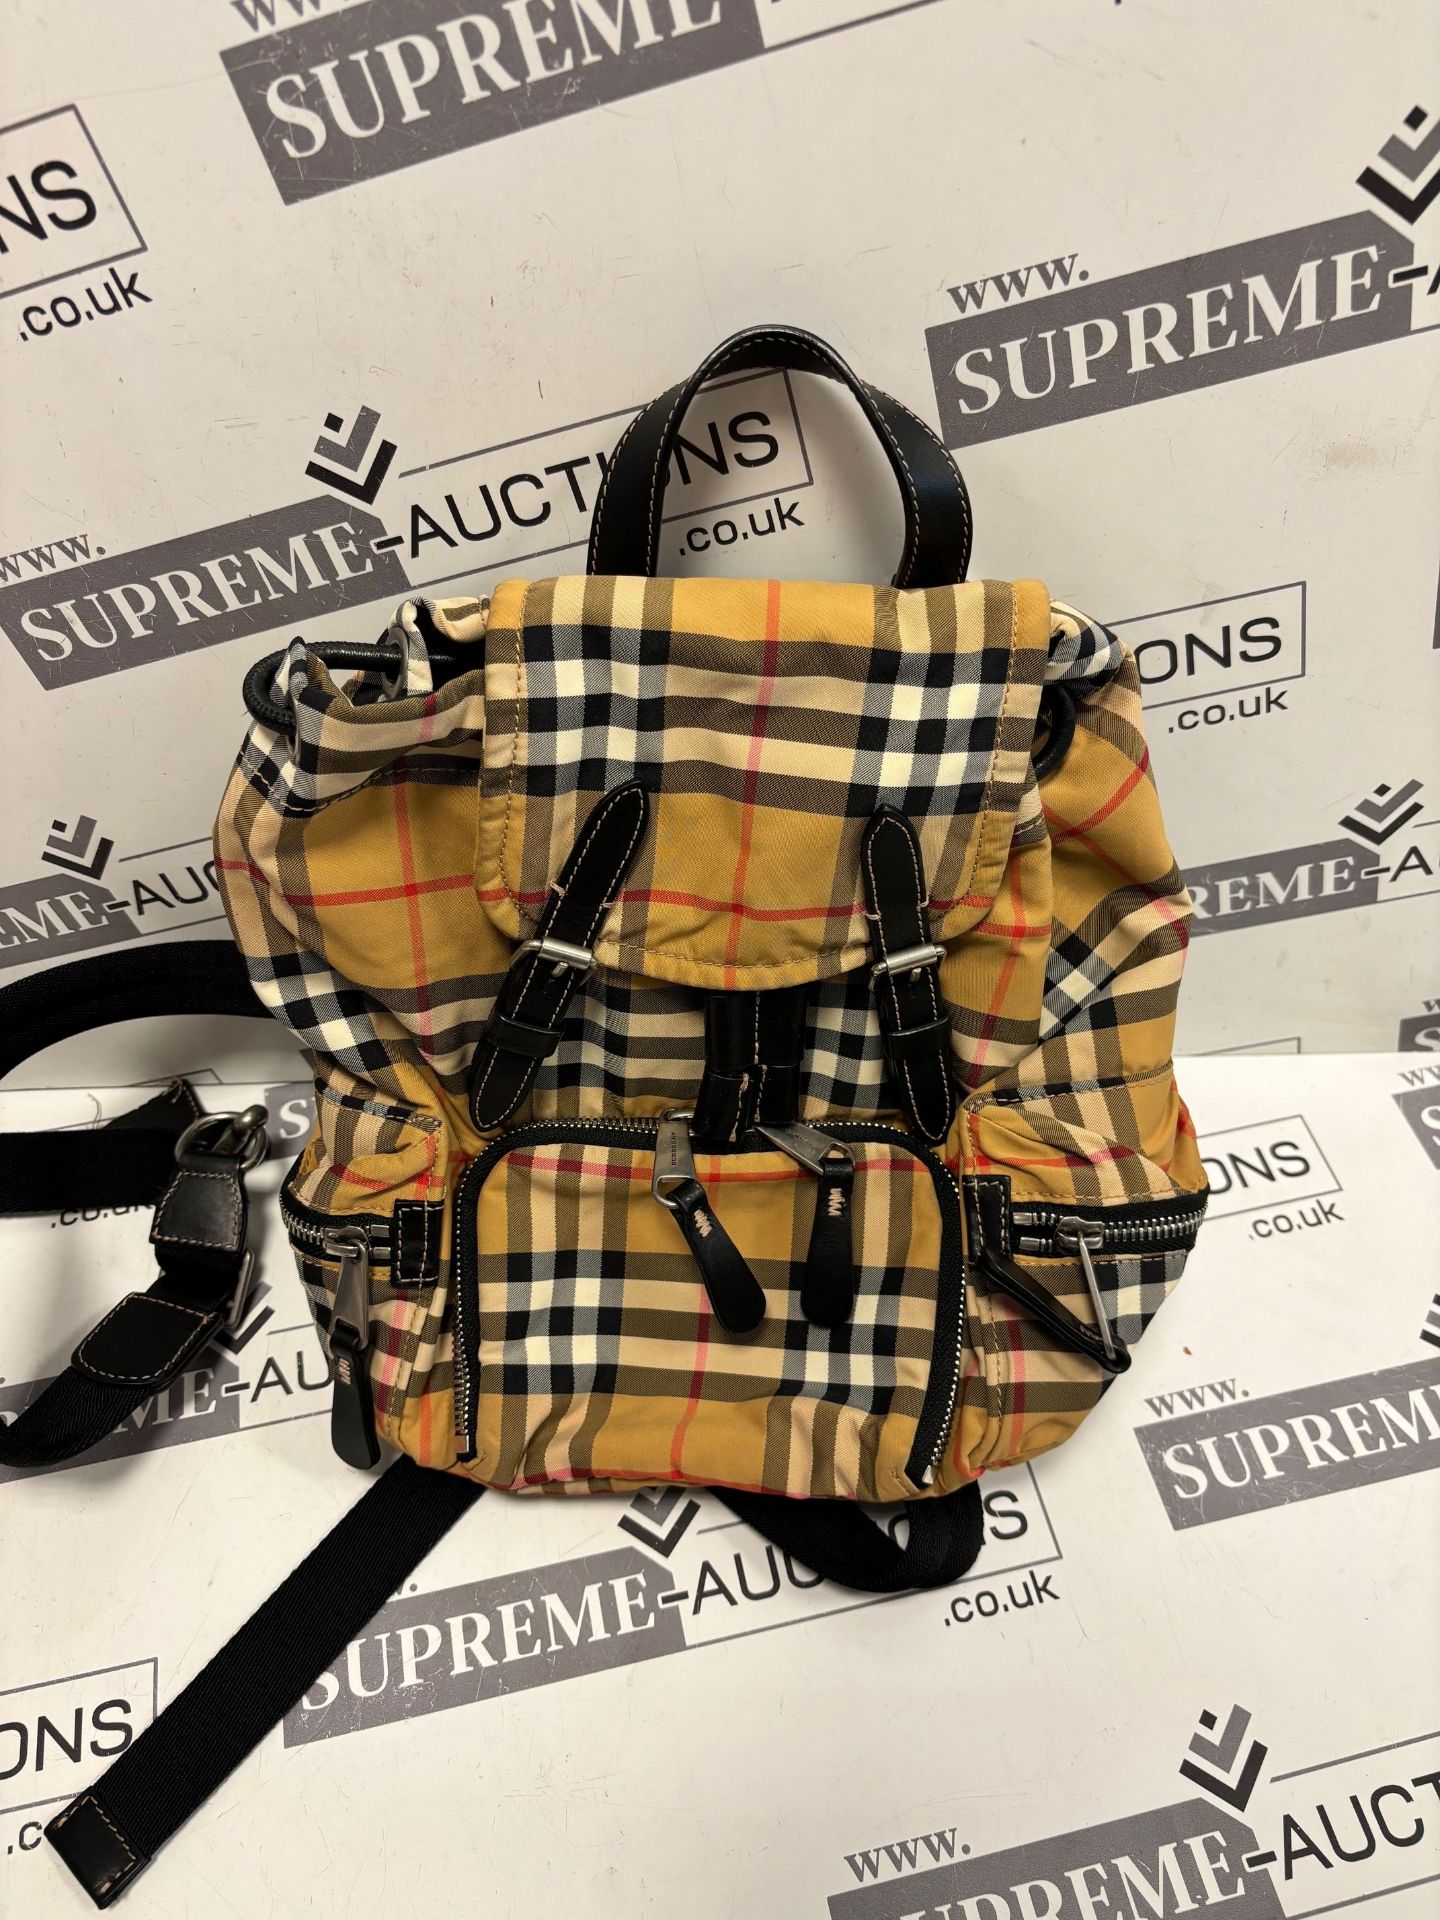 (No Vat) Burberry Small Rucksack Check Backpack. Approx 25x25cm. - Image 3 of 8